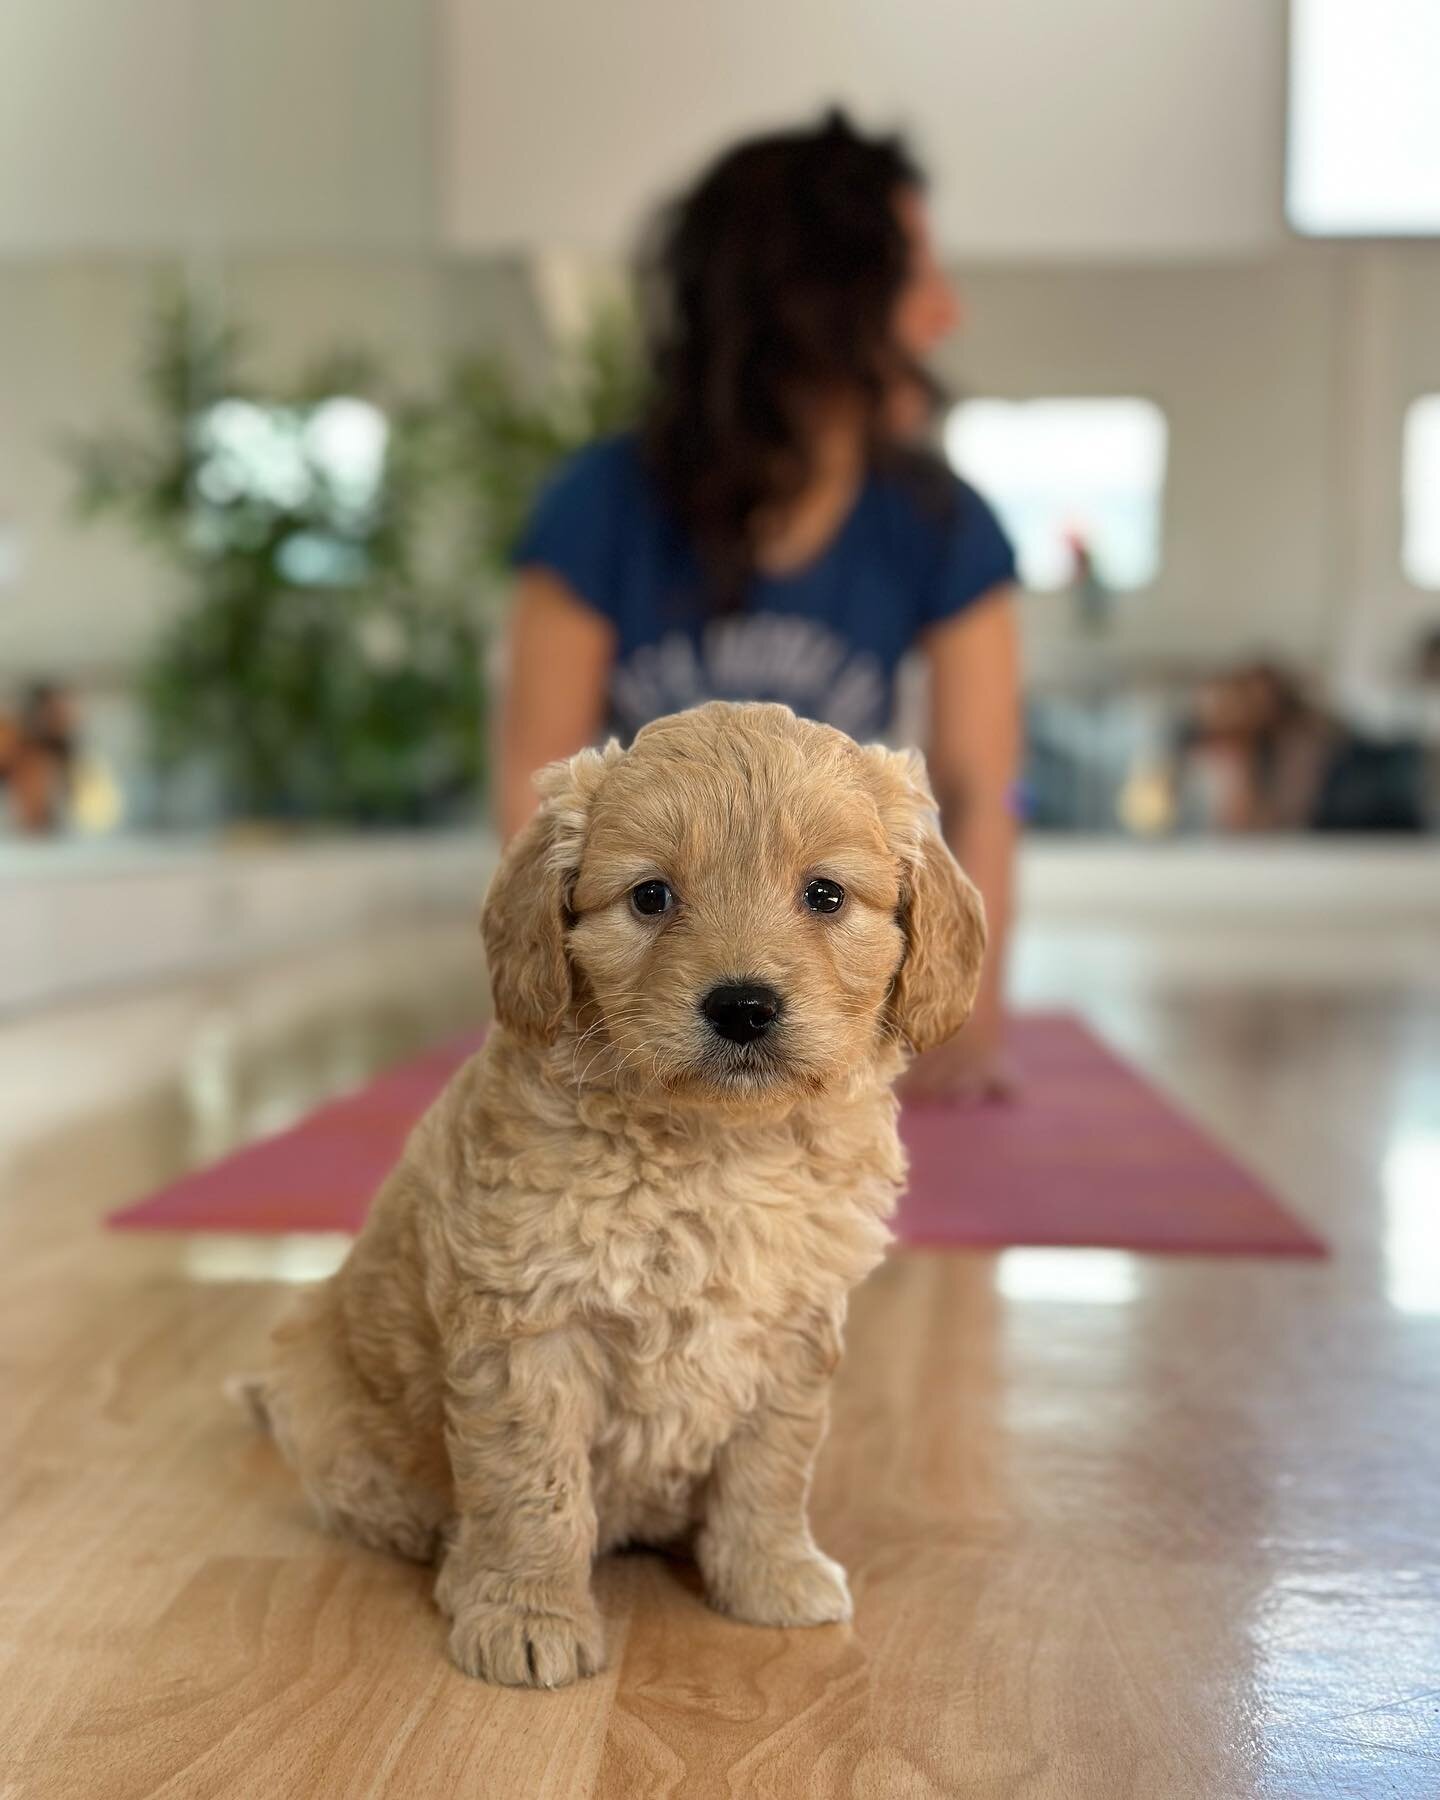 Say cheeseeee Crumpet! 📸 Join this little cutie-pie this Saturday at Paw Pal Yoga 🐶🐾

Tickets now on sale at: www.pawpalyoga.co.uk/book-tickets-1 🎟️
.
.
.
#puppyyoga #puppyyogalondon #pawpalyoga #thingstodoinlondon 
#puppiesofinstagram #puppies #